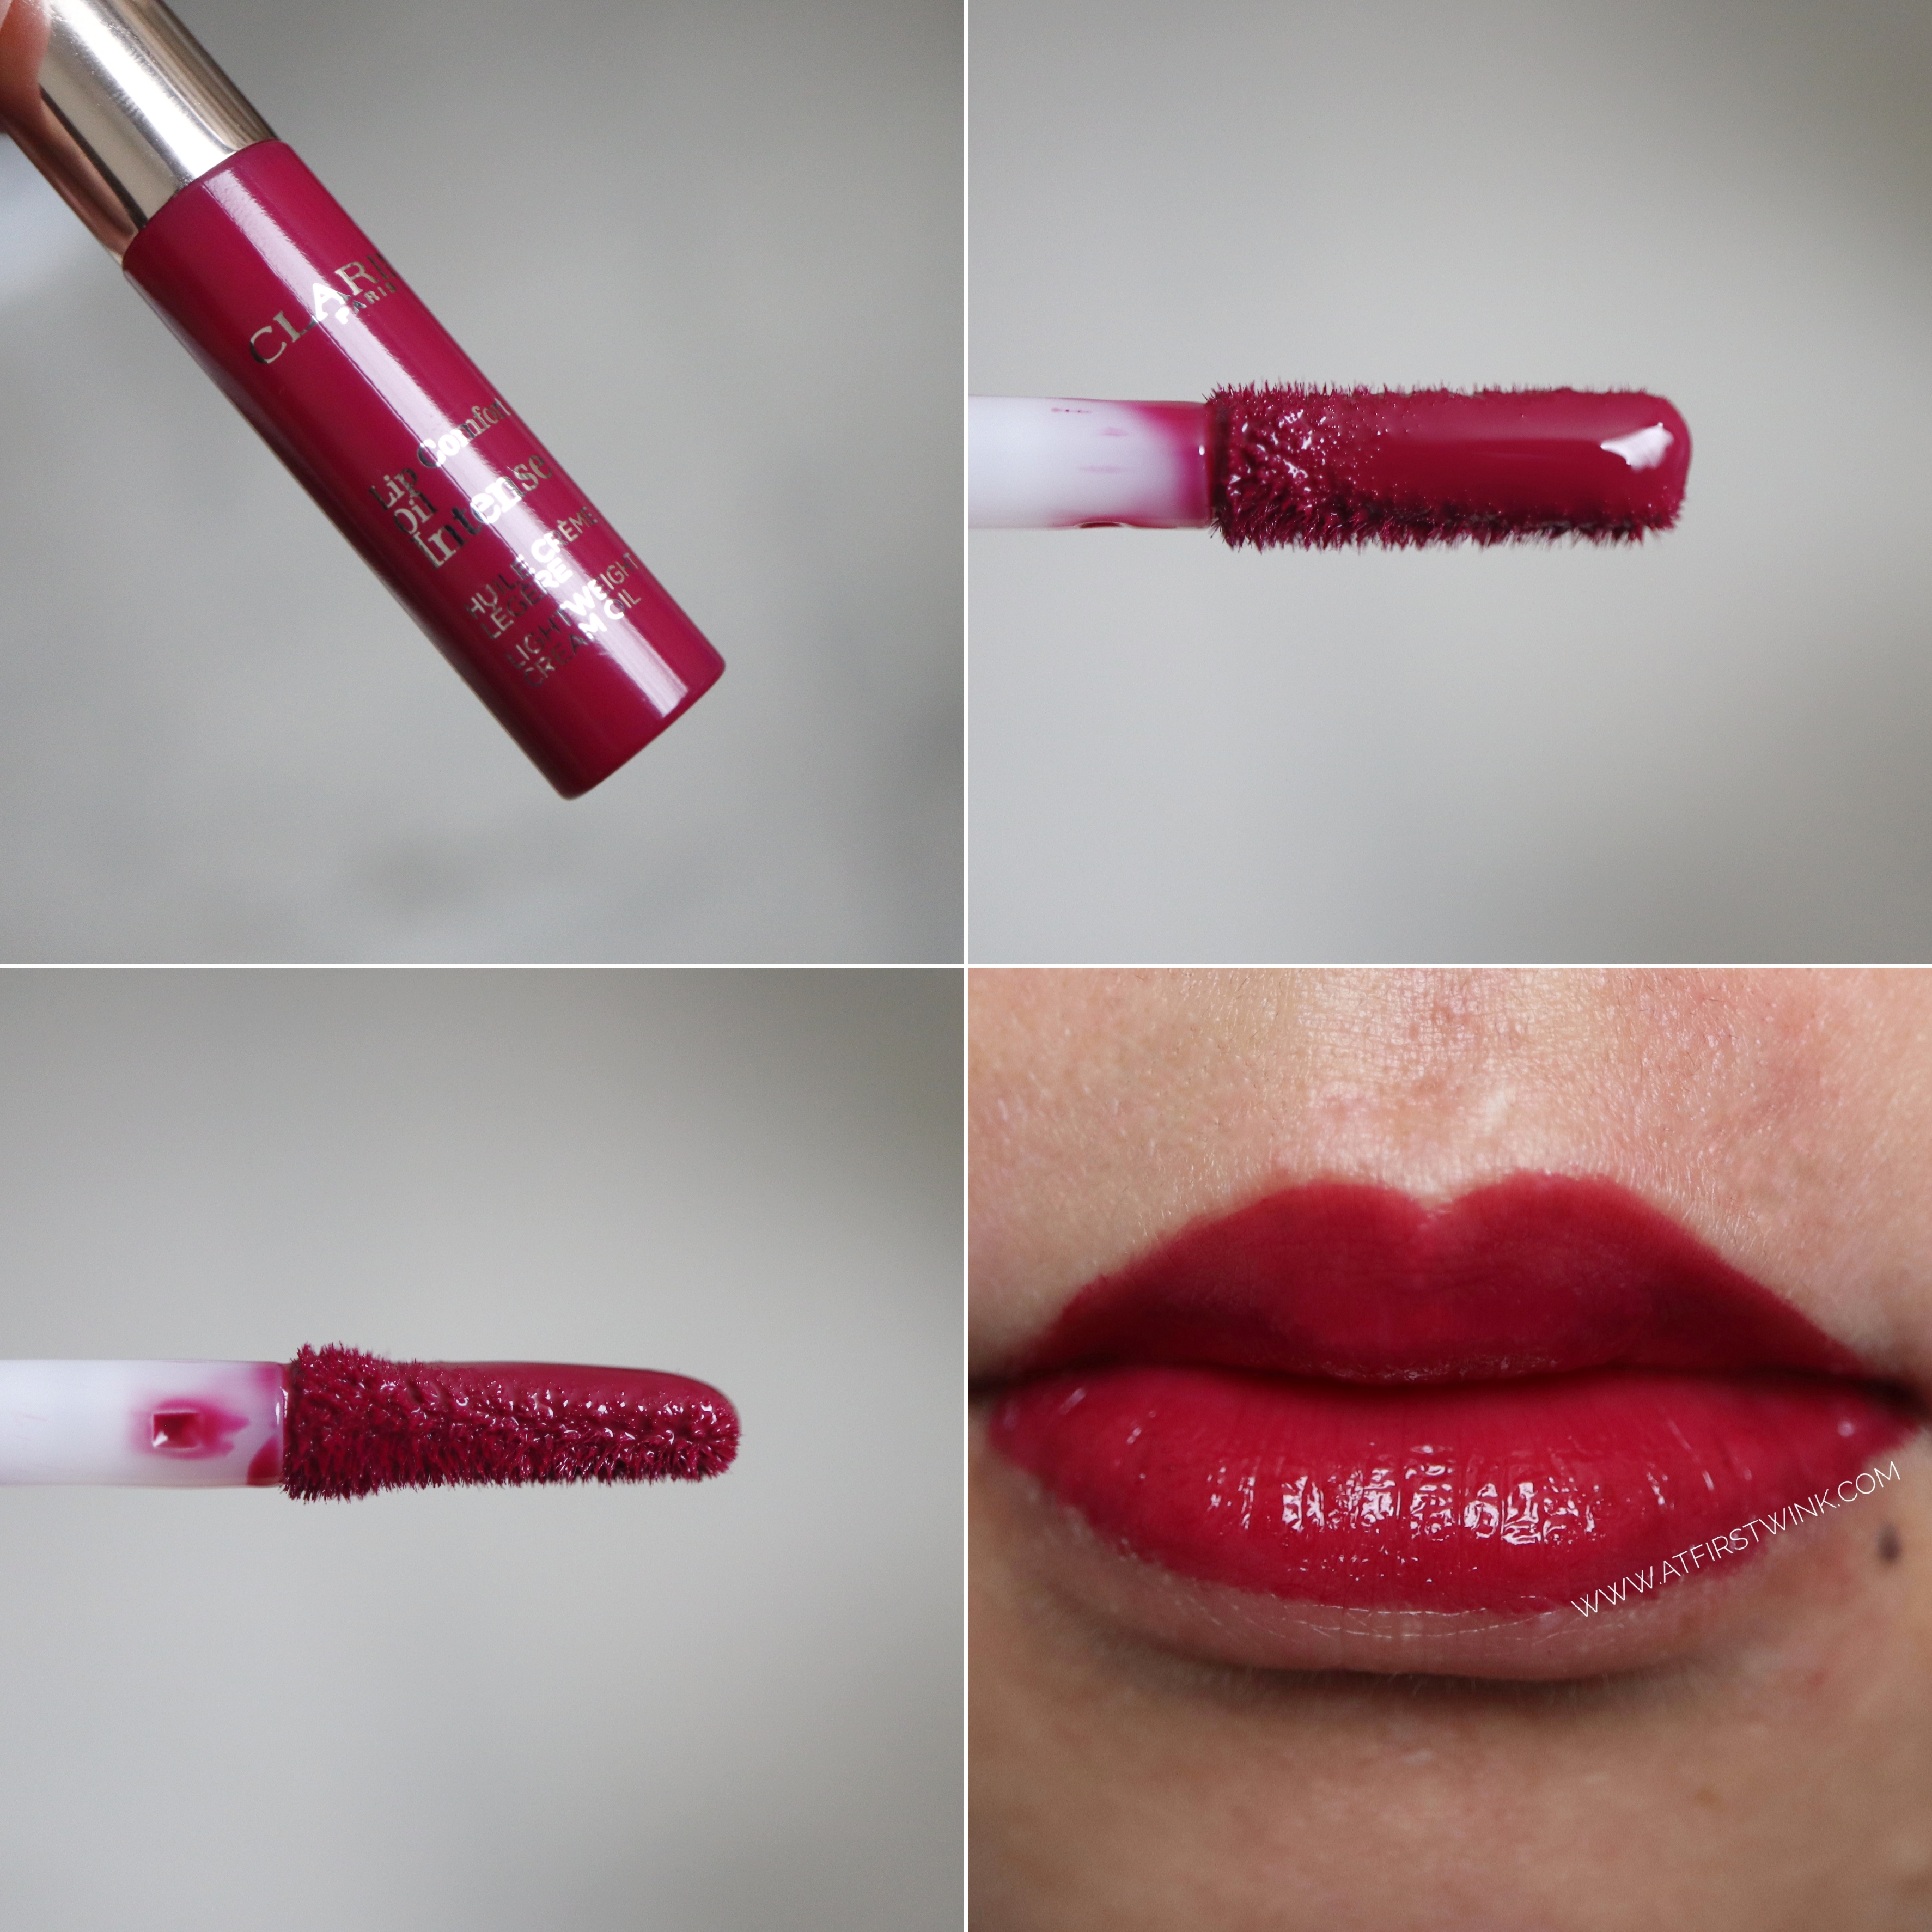 læbe Svag paraply Review: Clarins lip comfort oil - honey, red berry, and intense pink